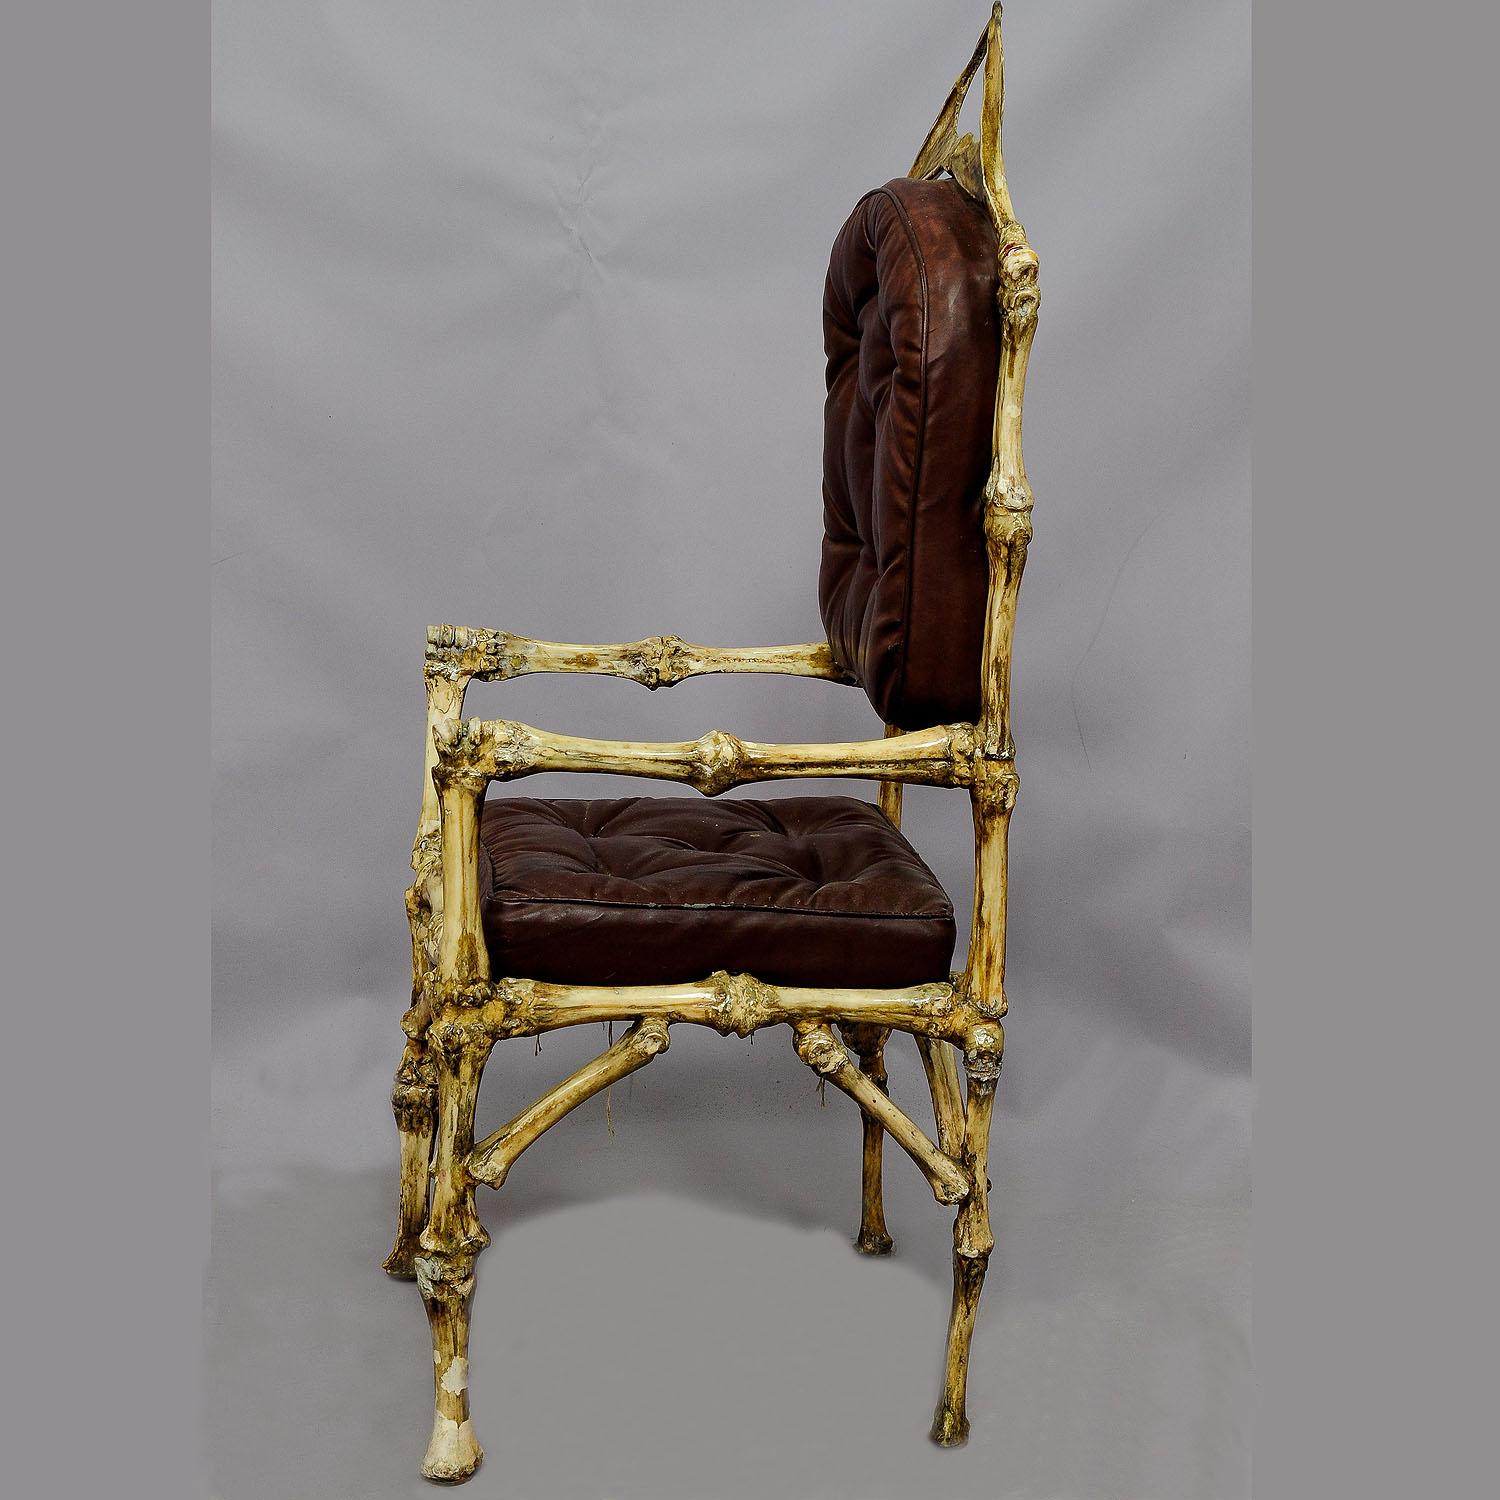 A great piece of fantasy furniture - a throne chair made of original bones from the female cattle (Bos taurus). All parts are made of real cattle bones sticked together with iron rods. The chair has hip bones on top of the backrest. It was